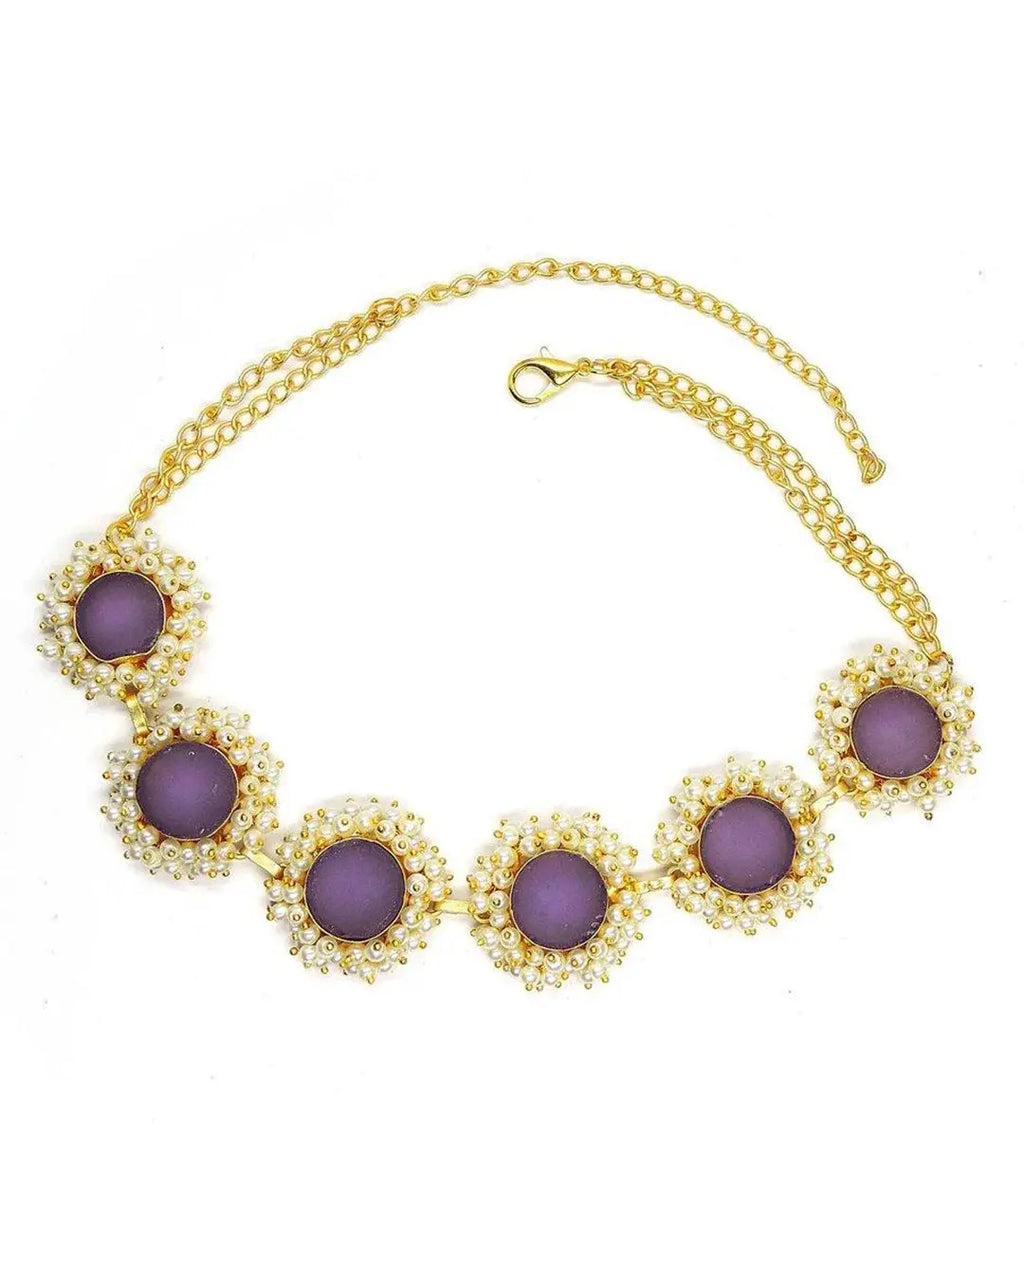 Bloom Necklace in Amethyst- Handcrafted Jewellery from Dori